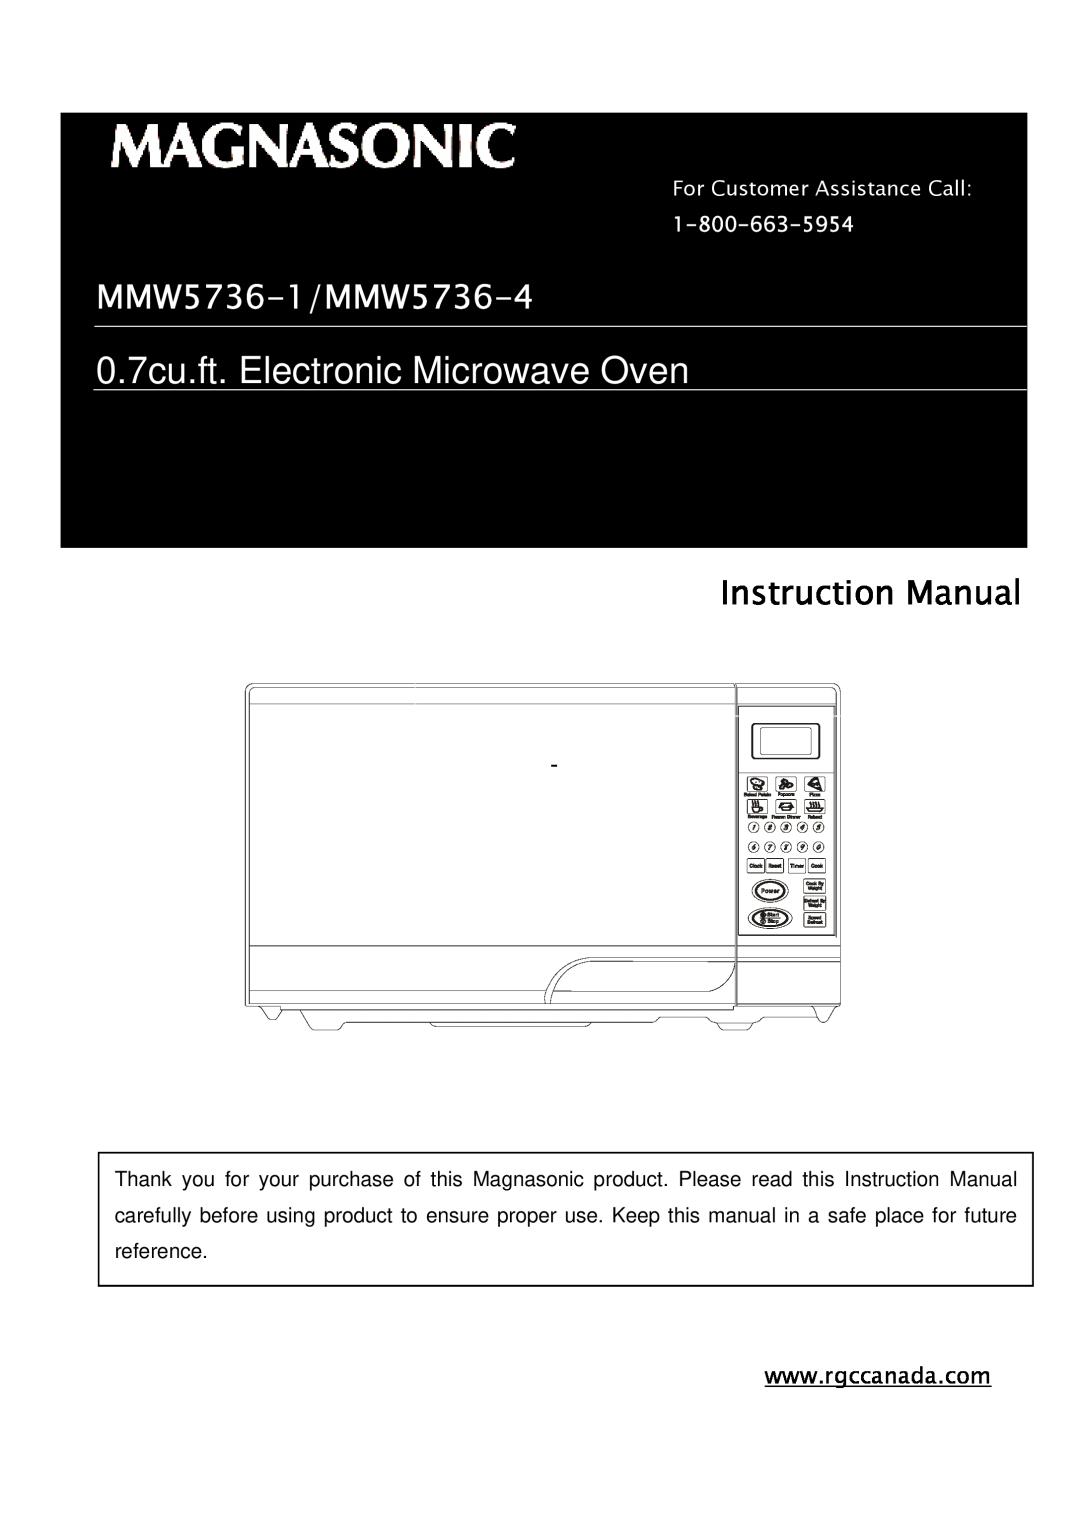 Magnasonic instruction manual 0.7cu.ft. Electronic Microwave Oven, MMW5736-1/MMW5736-4, For Customer Assistance Call 